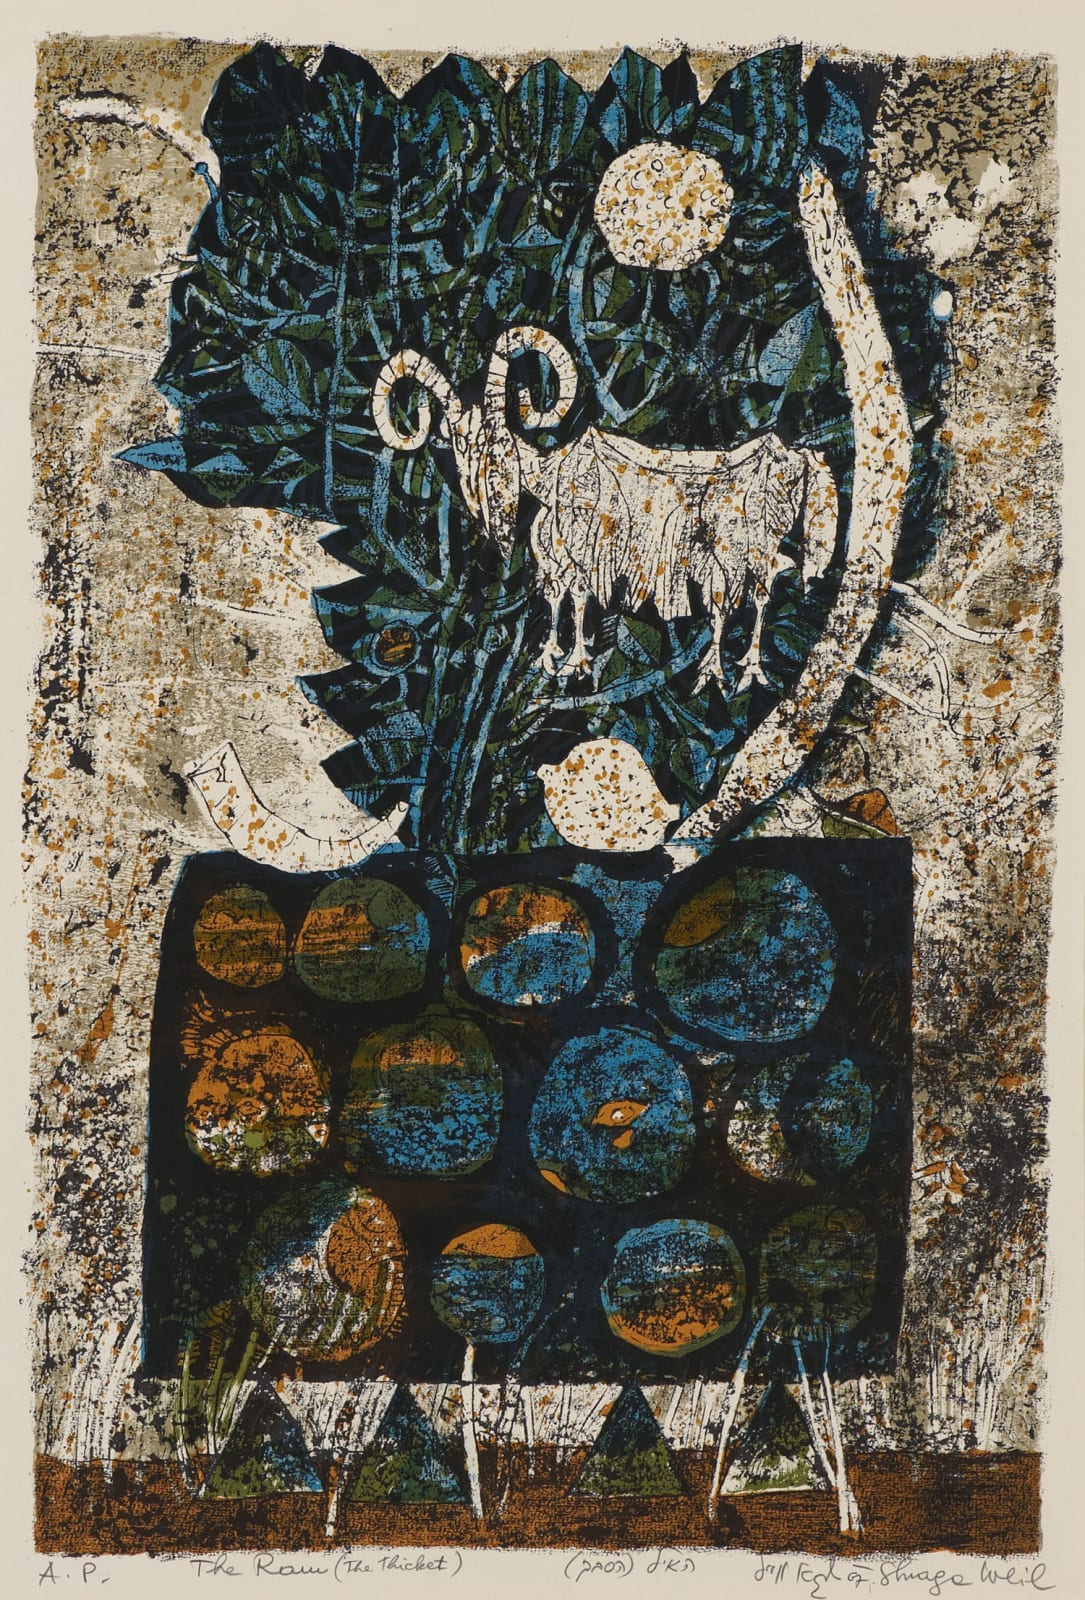 Shraga Weil (1918 - 2009) Symbols of Passover (The Ram) n.d. Lithograph on paper 50.6 x 34.6 cm Ben Uri Collection © Shraga Weil estate